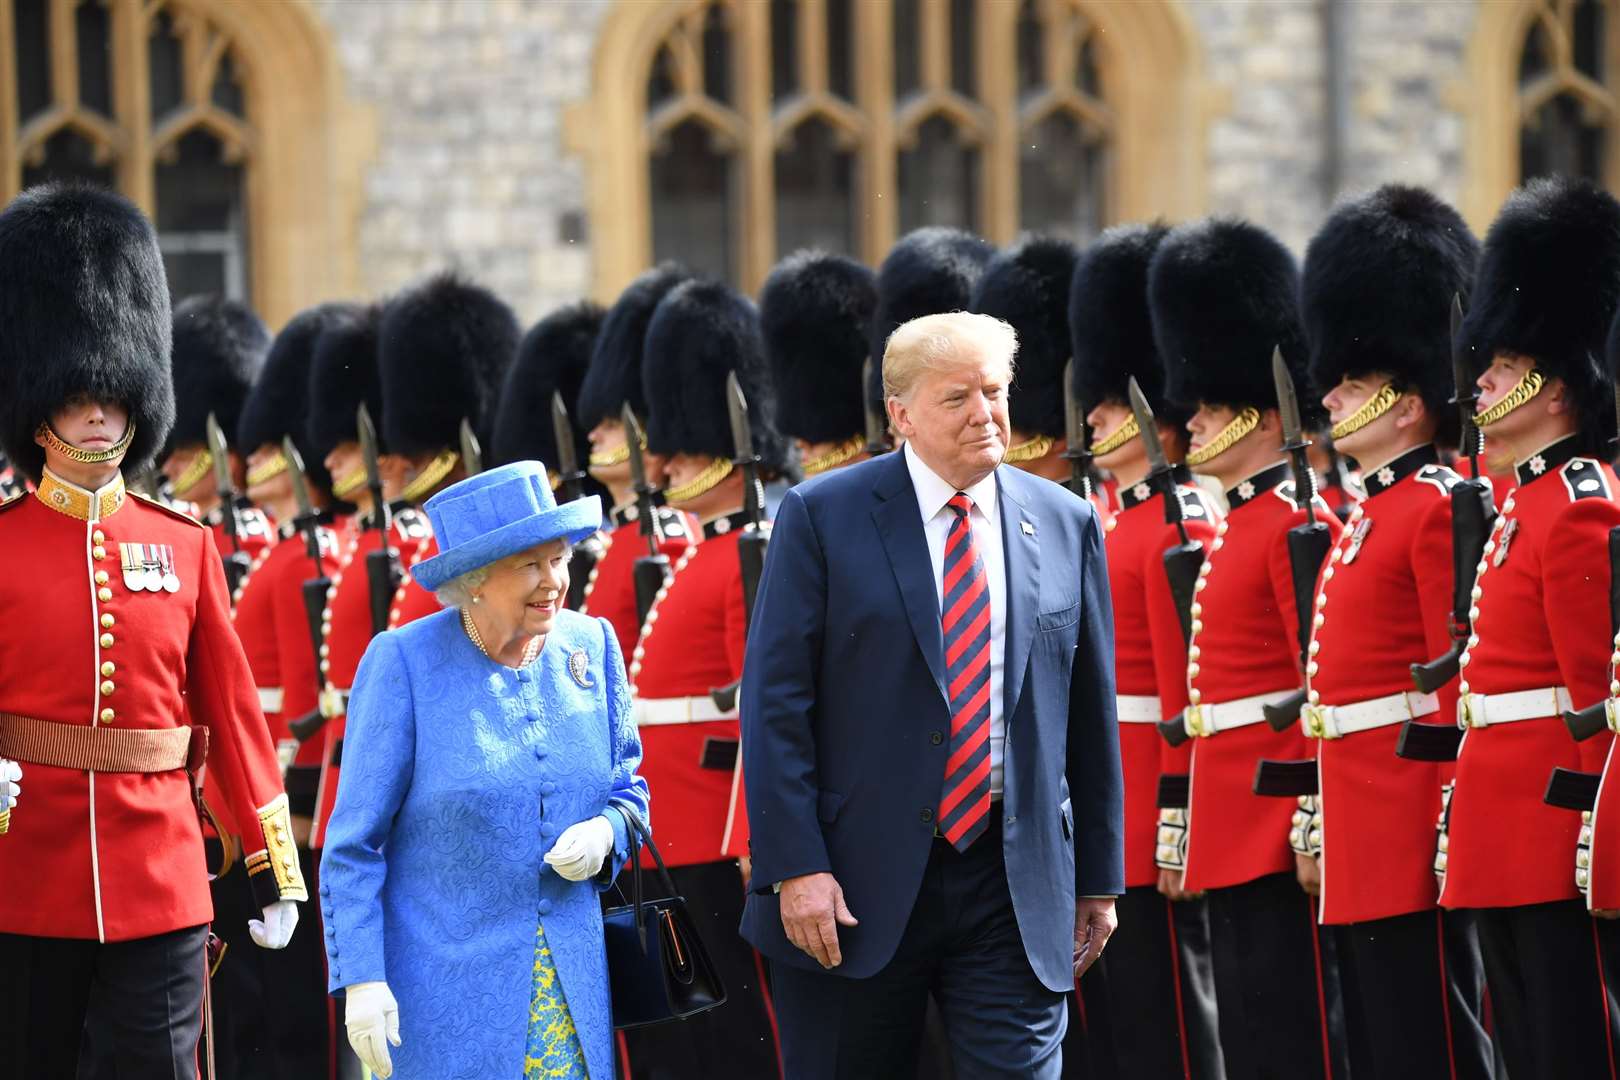 Donald Trump and the Queen inspecting a Guard of Honour in 2018 (SGT Paul Randall RLC/MoD/PA)